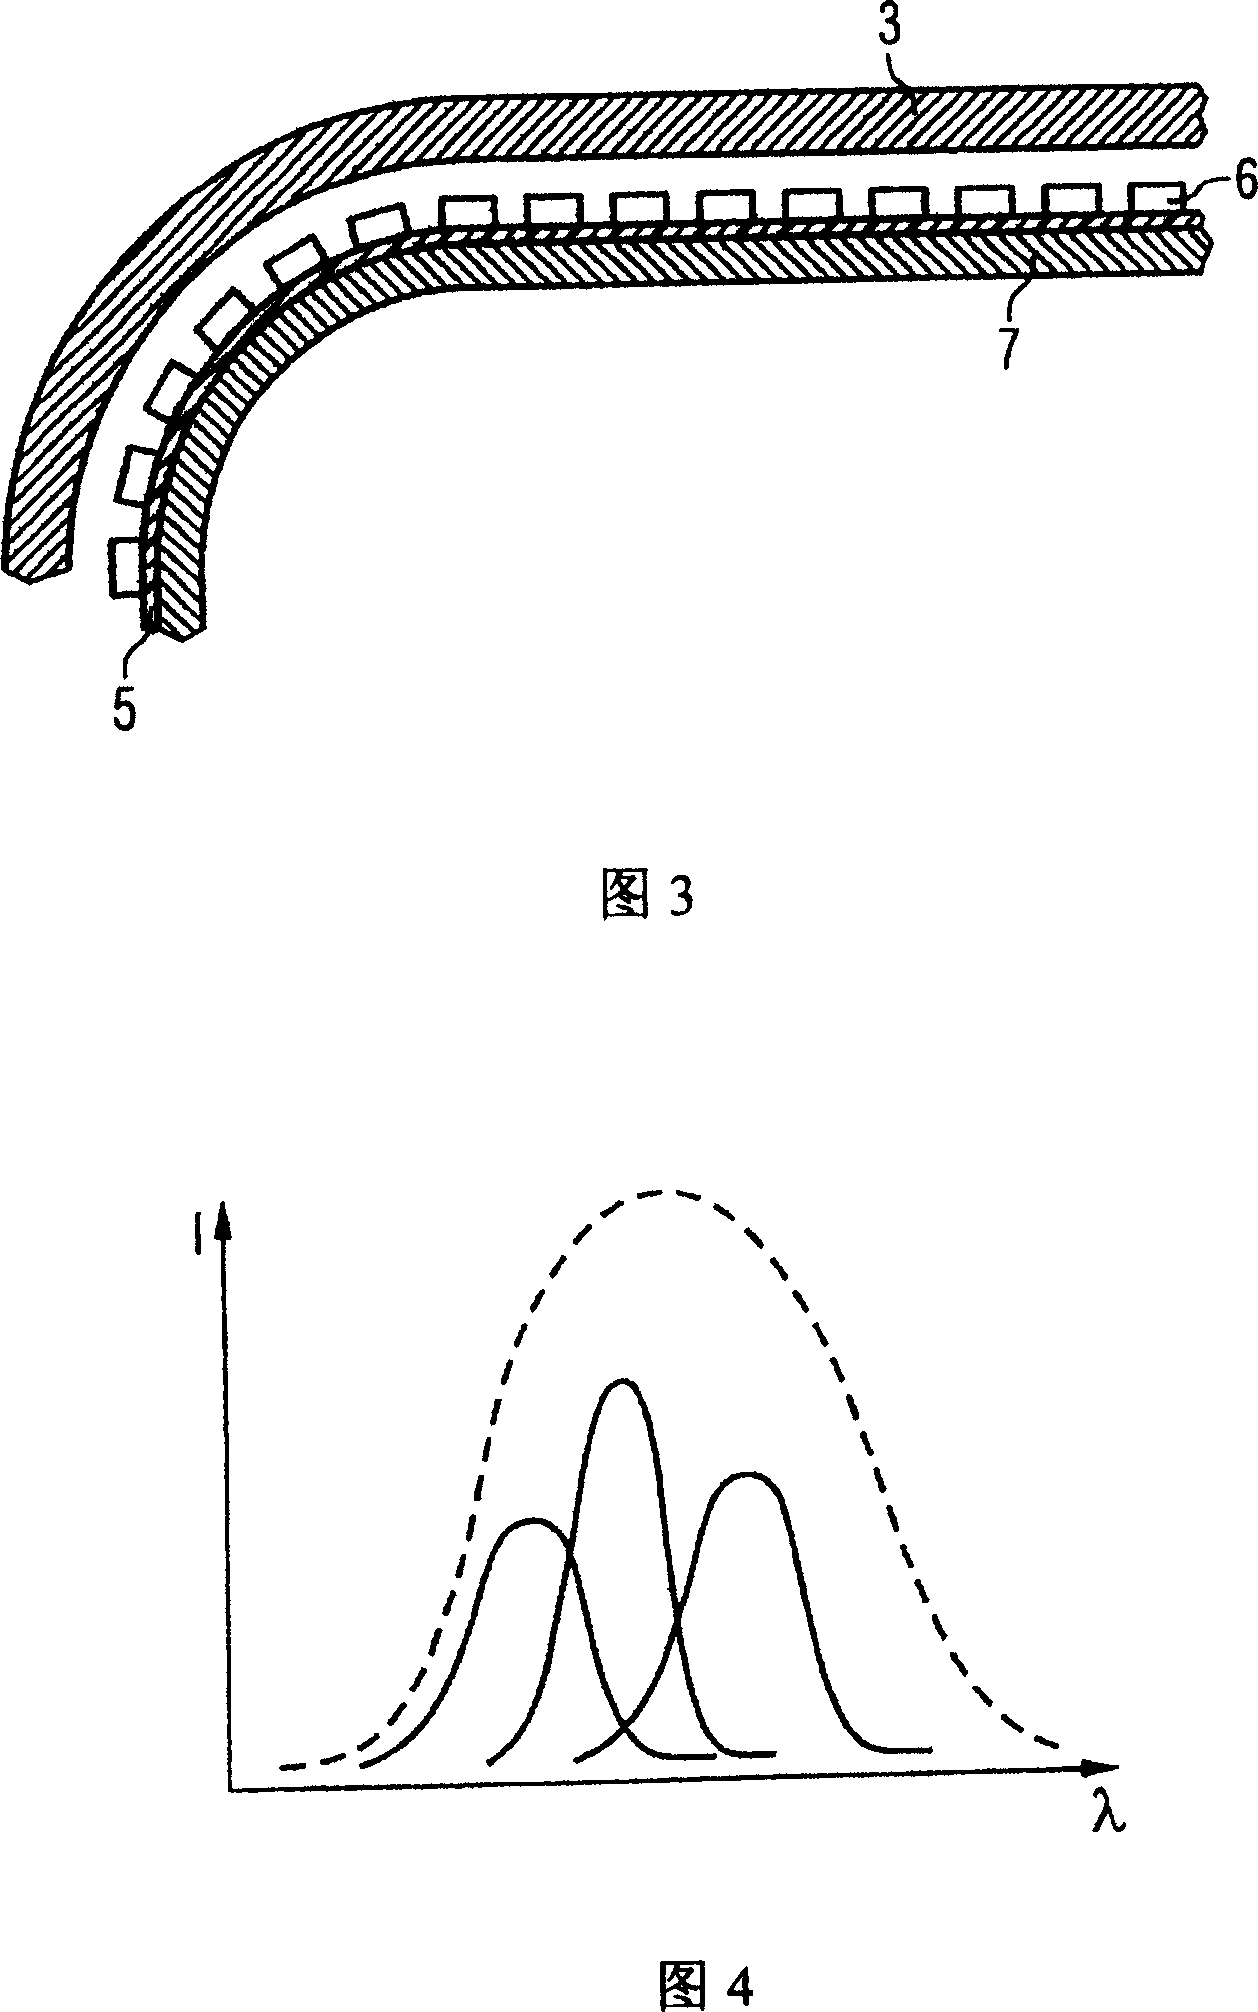 UV light-emitting diodes as a radiation source in a device for the artificial weathering of samples